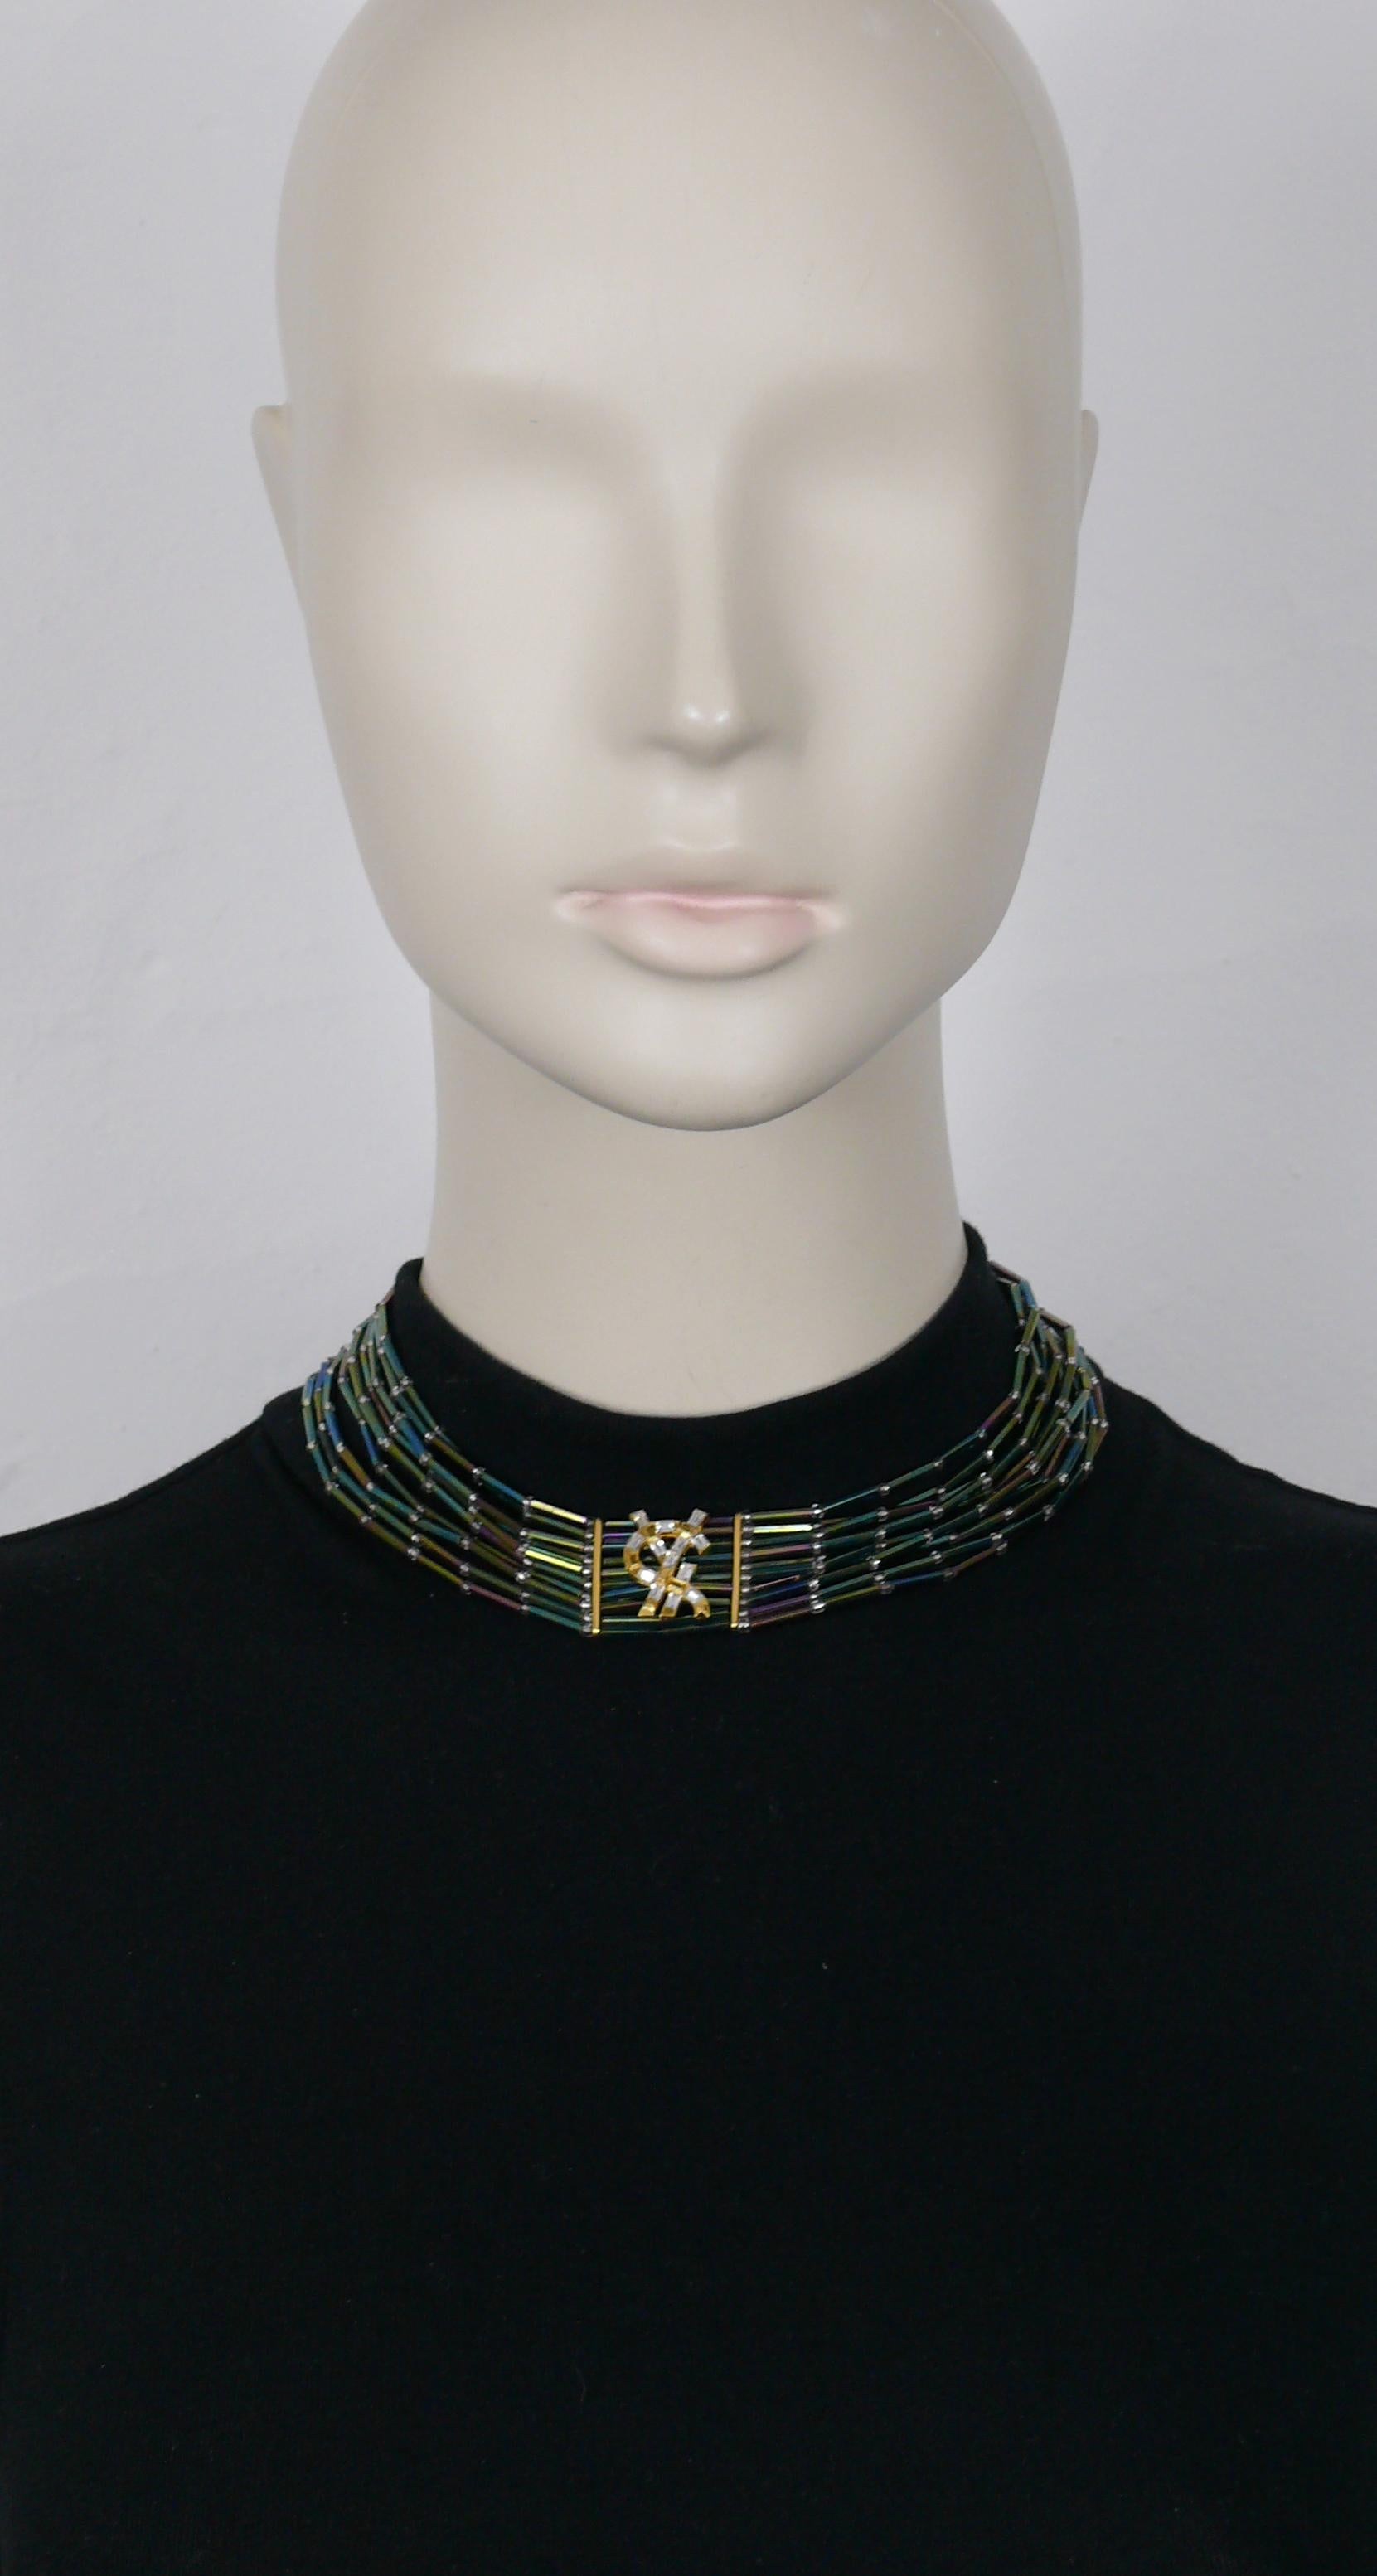 YVES SAINT LAURENT vintage choker necklace featuring iridescent glass tube beads and a YSL logo embellished with crystals at the center.

T-bar and toggles closure.
Adjustable length.

Embossed YSL on the toggles.

Indicative measurements :